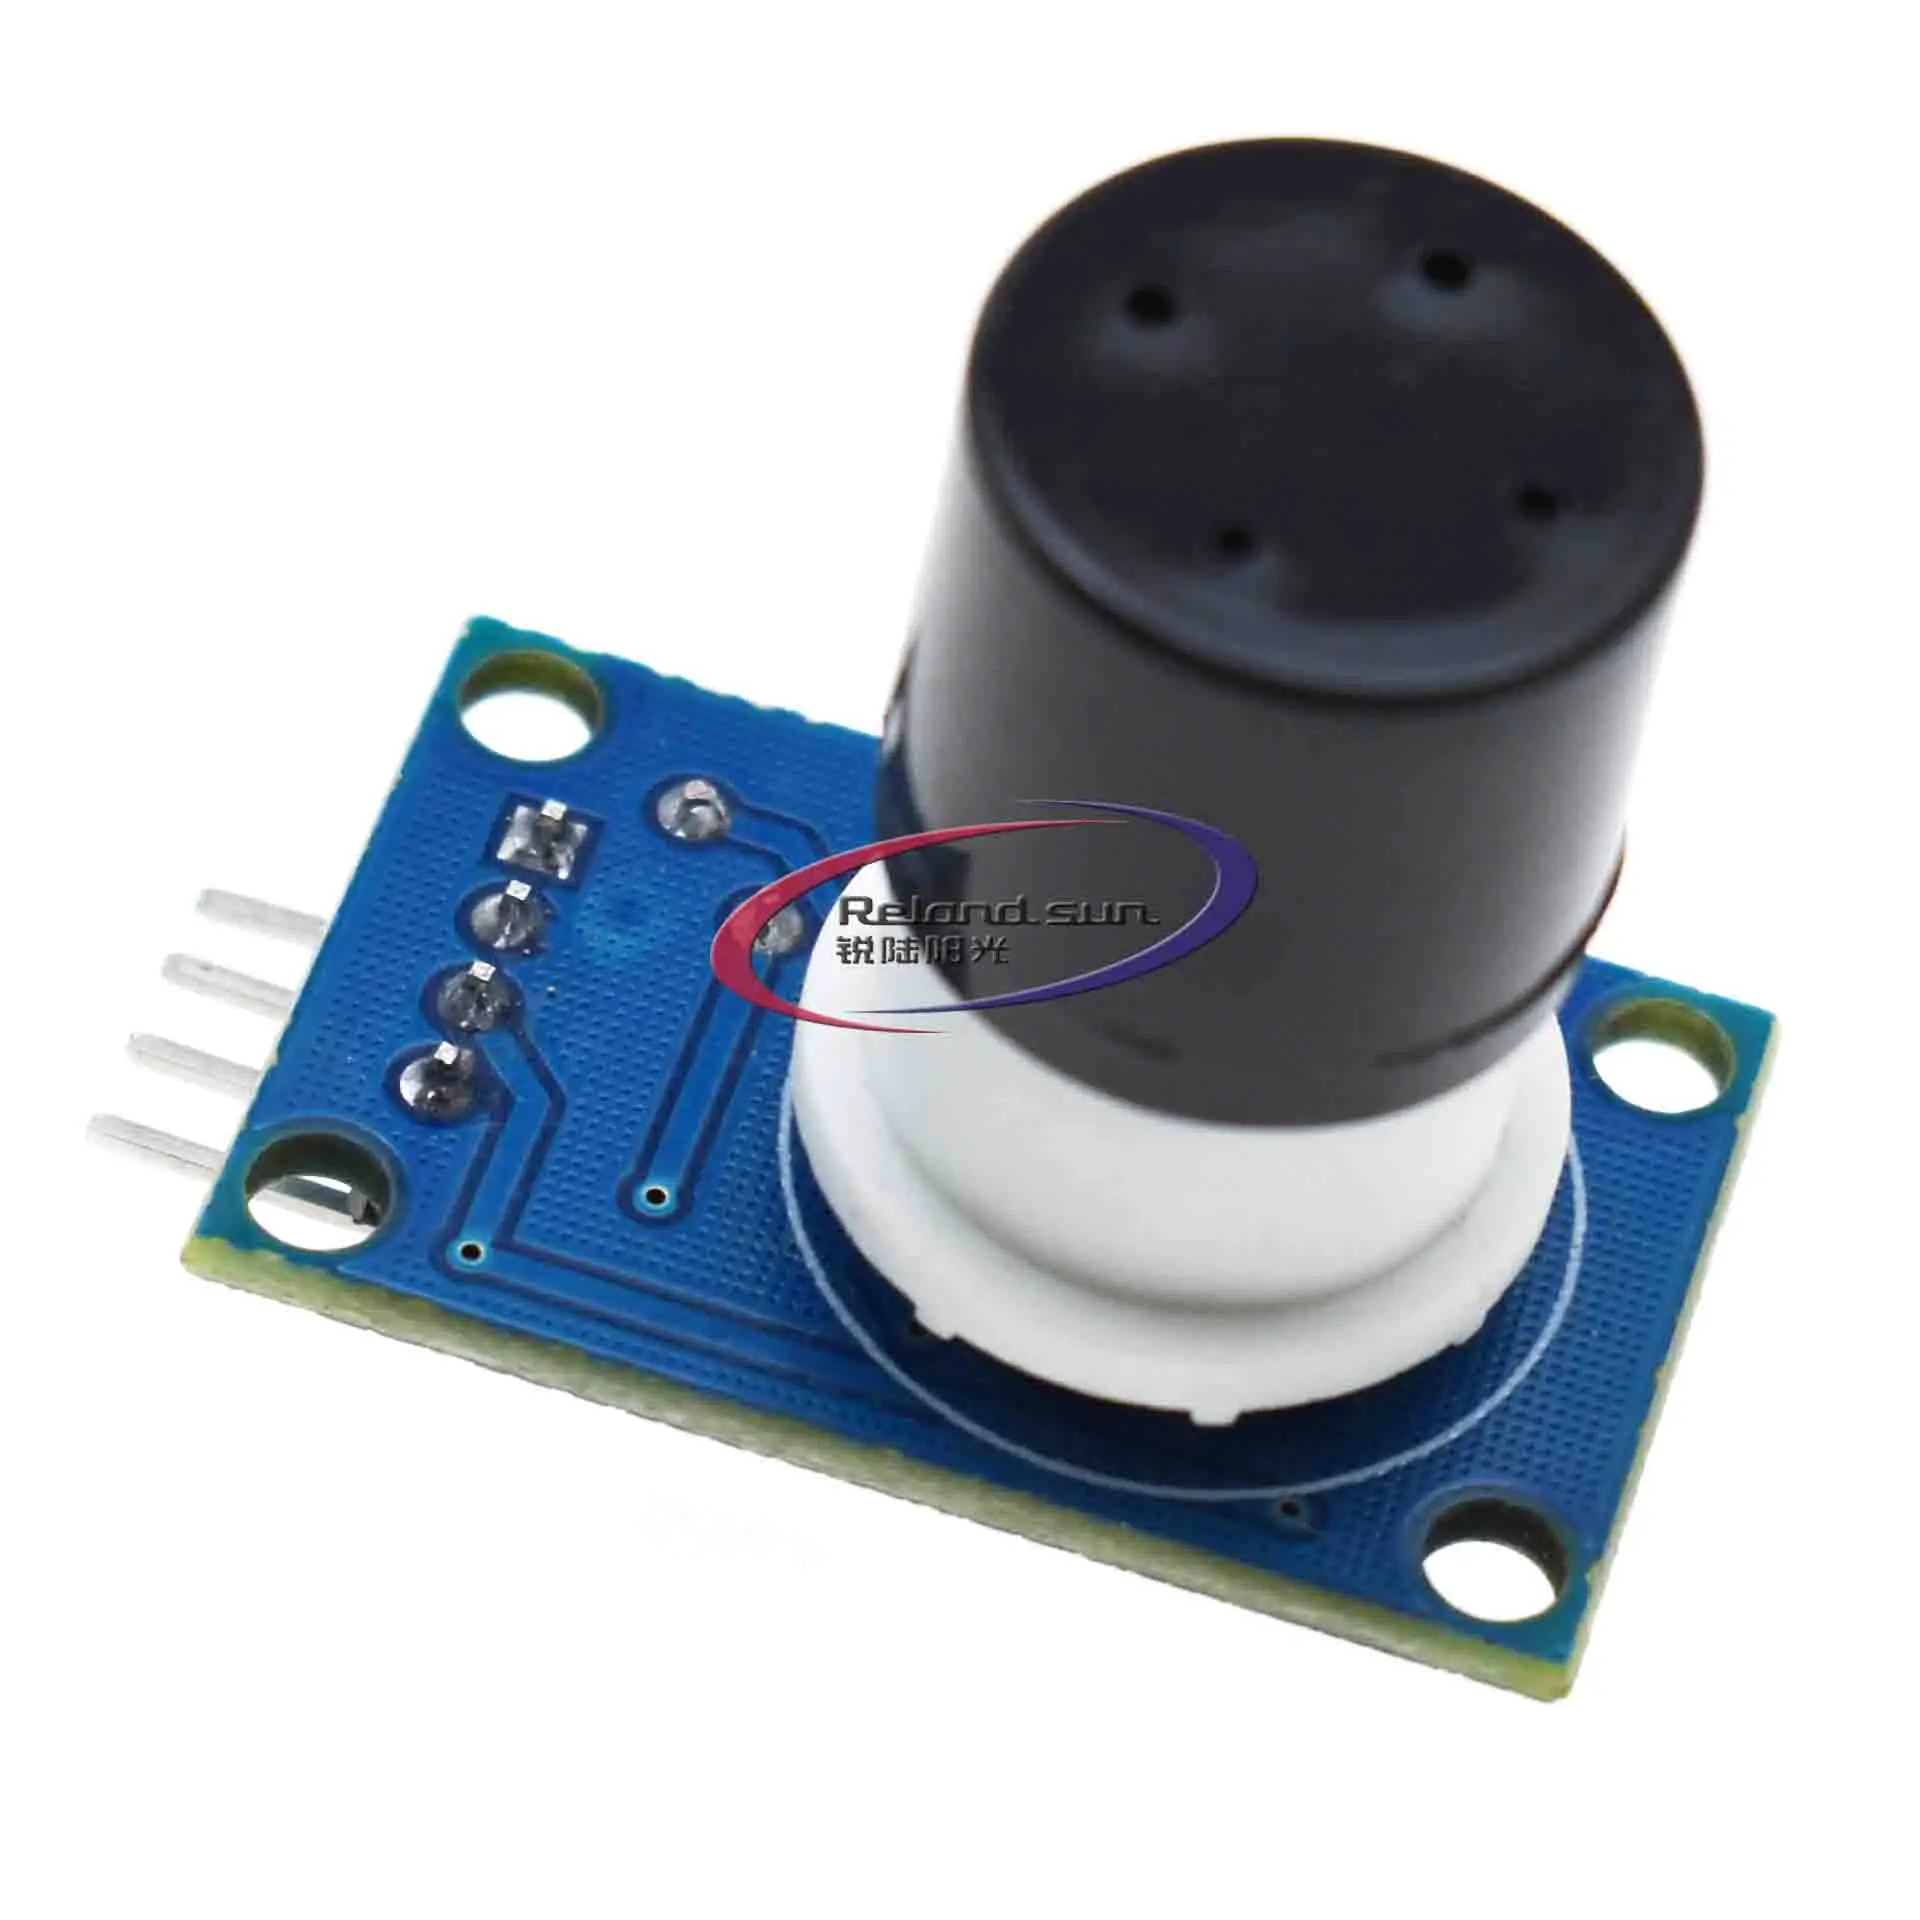 Details about   MQ131 Ozone Gas Detection Sensor Module O3 Monitoring Fast Response with Shell 